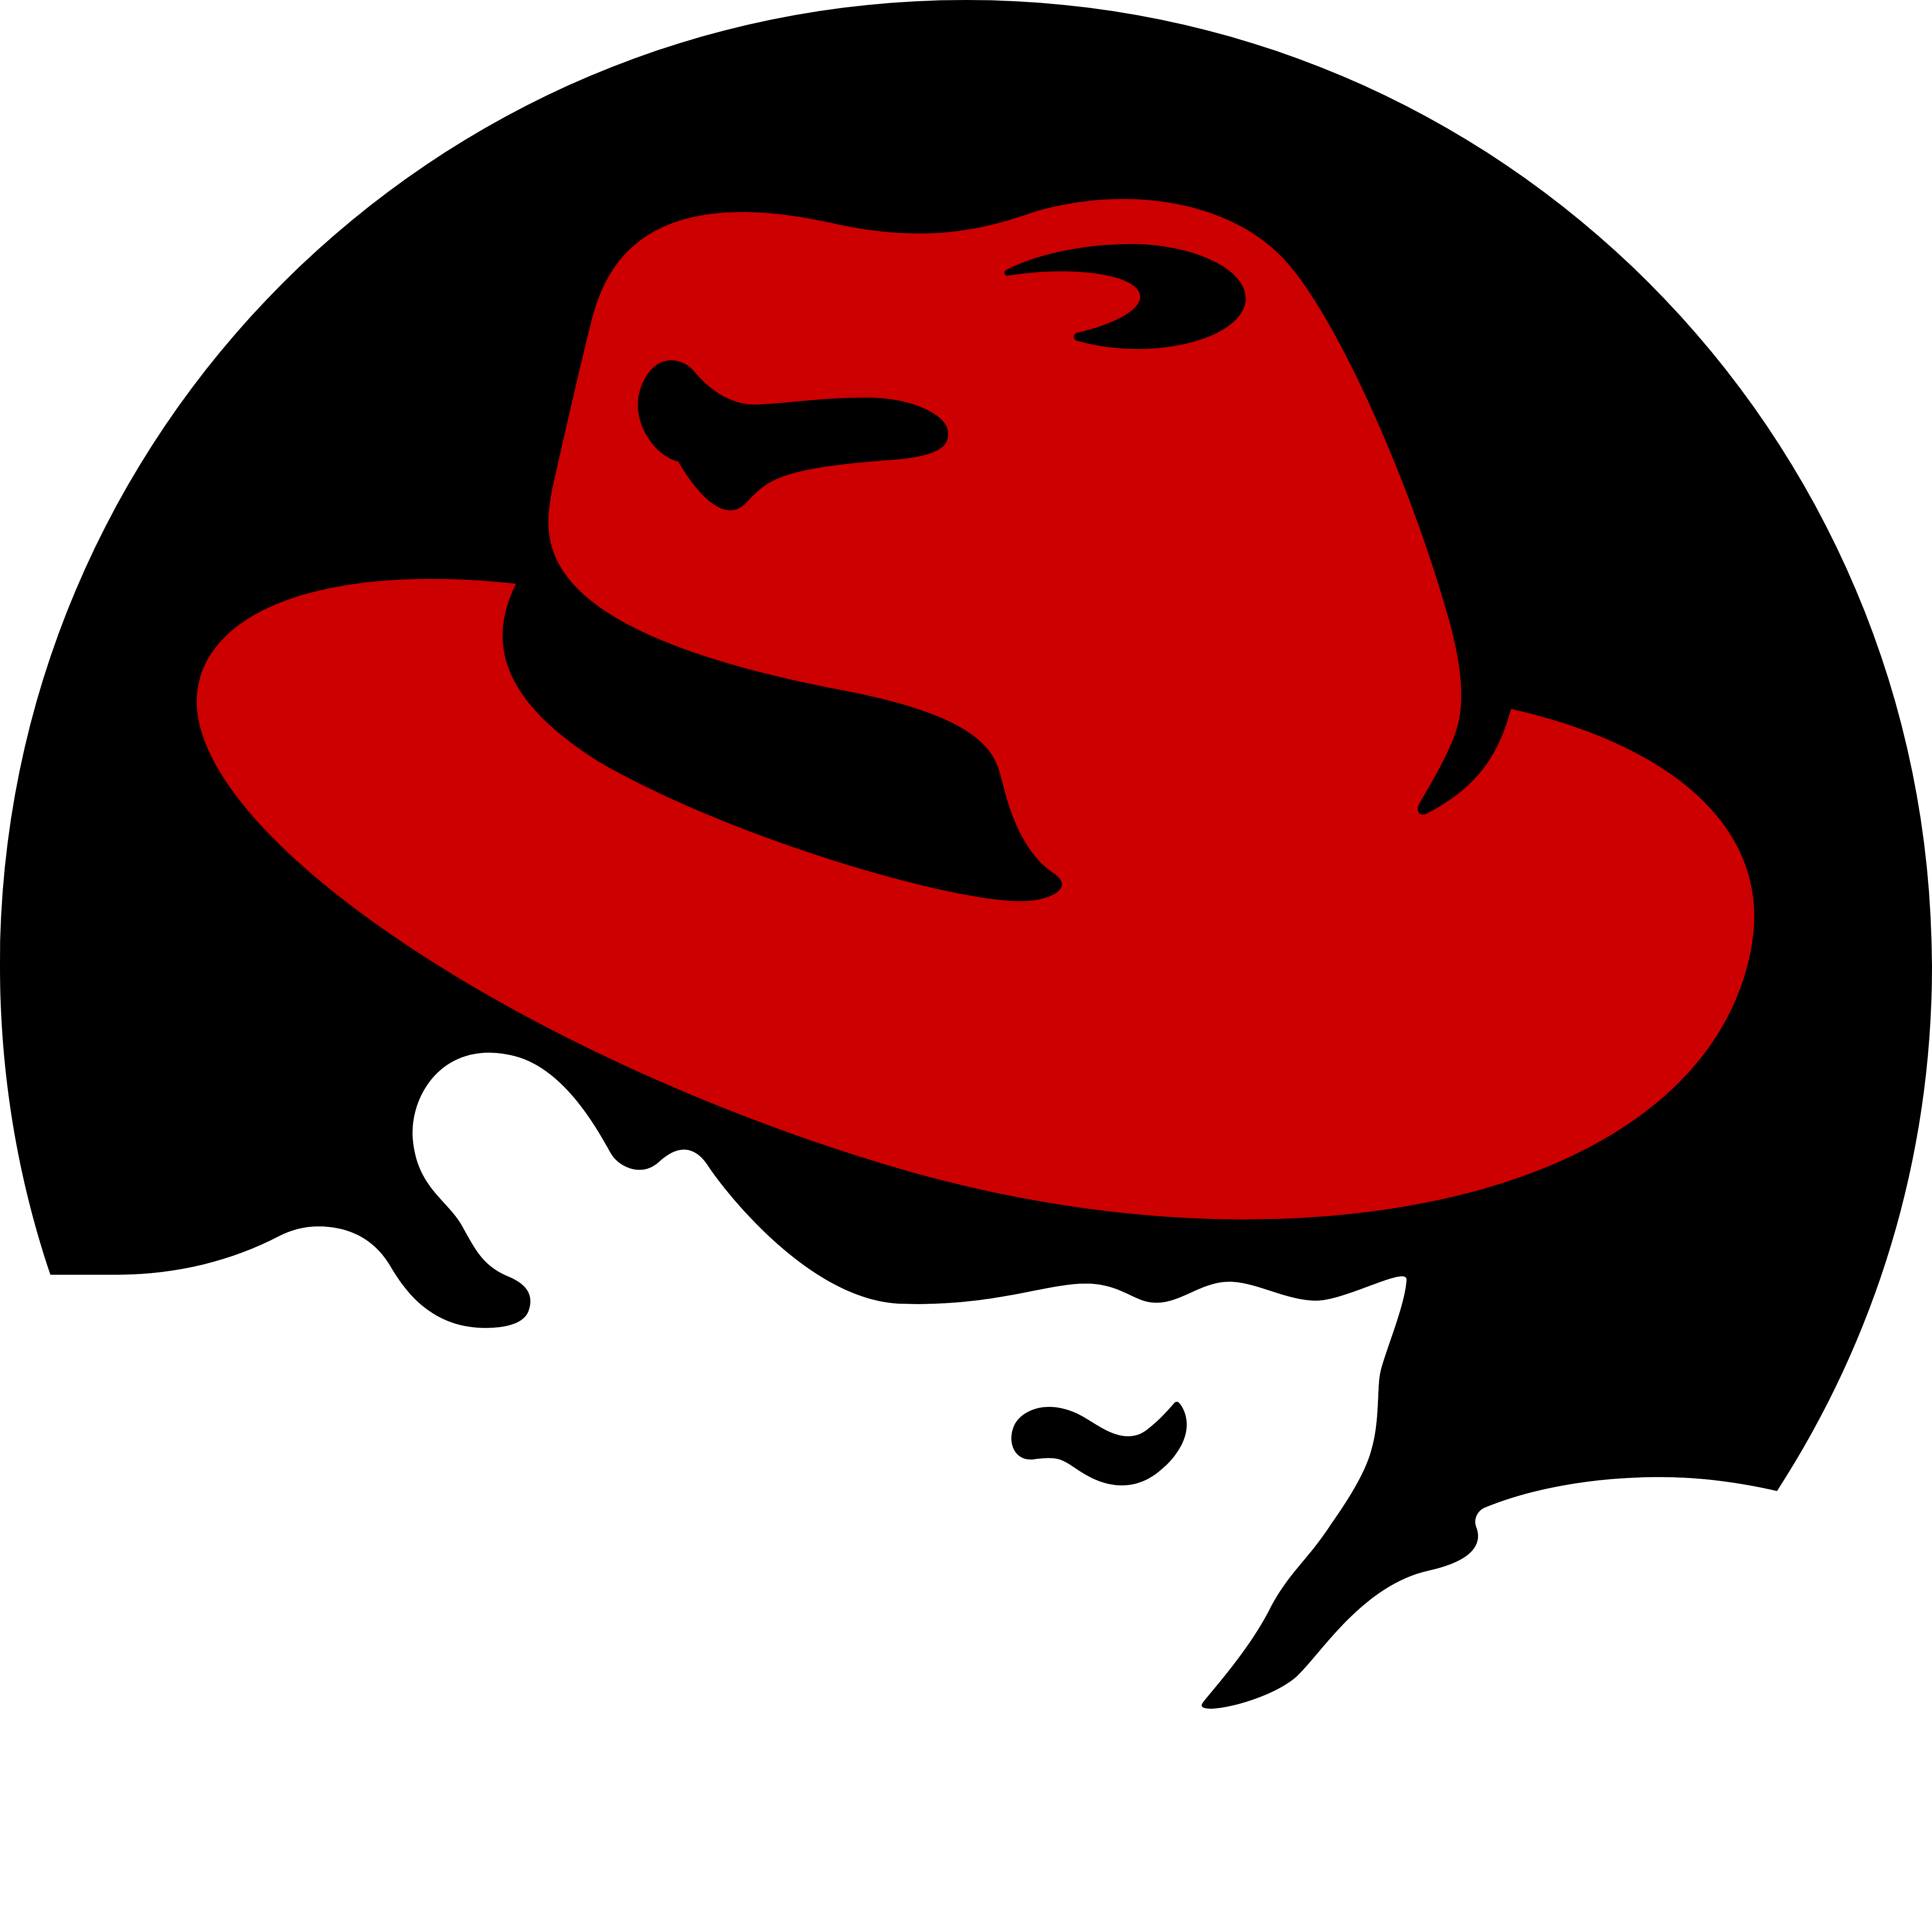 Red hat 8. Red hat лого. Ред хат линукс. Red hat Linux logo. Дистрибутивы Linux Red hat.